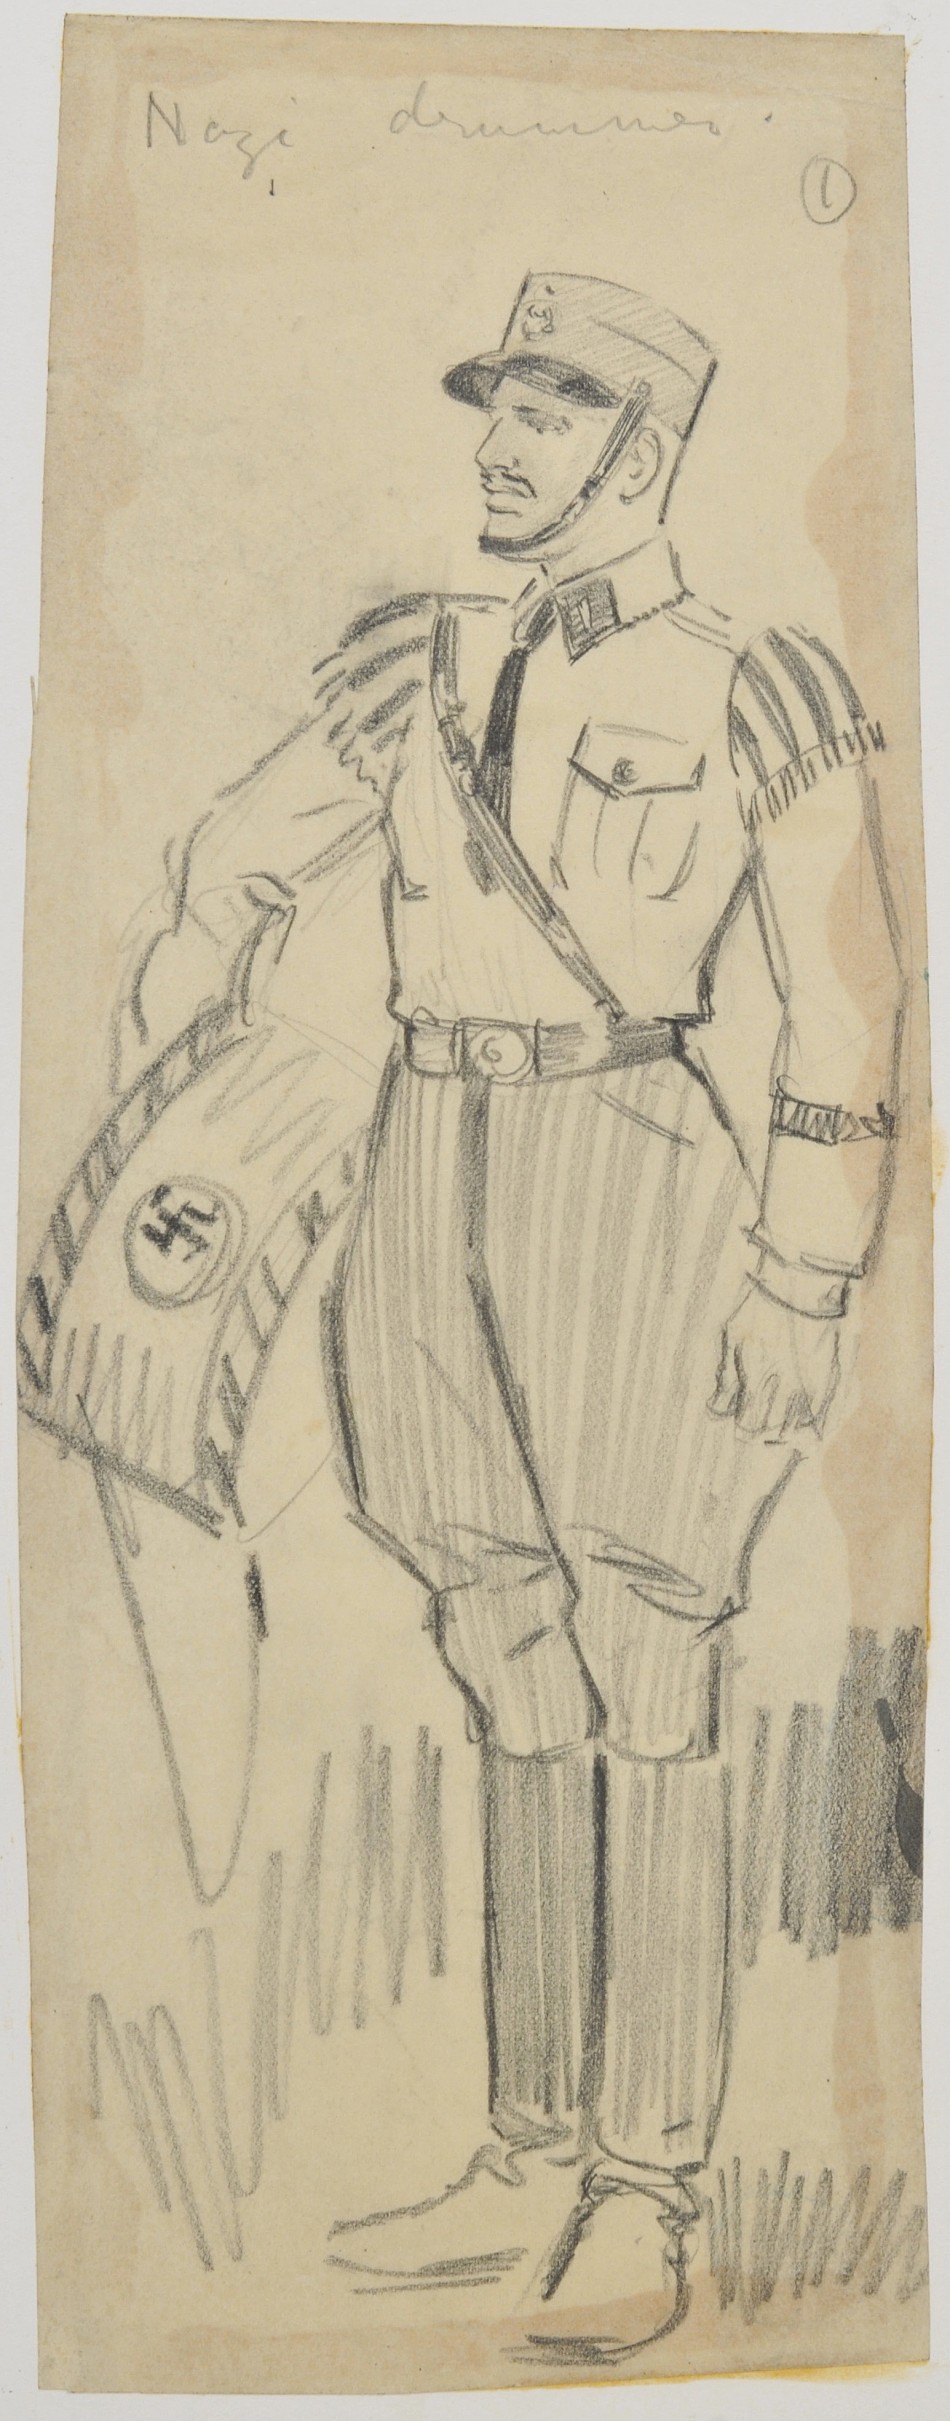 Lost Sketches of Adolf Hitler and Top Nazis Go Under The Hammer